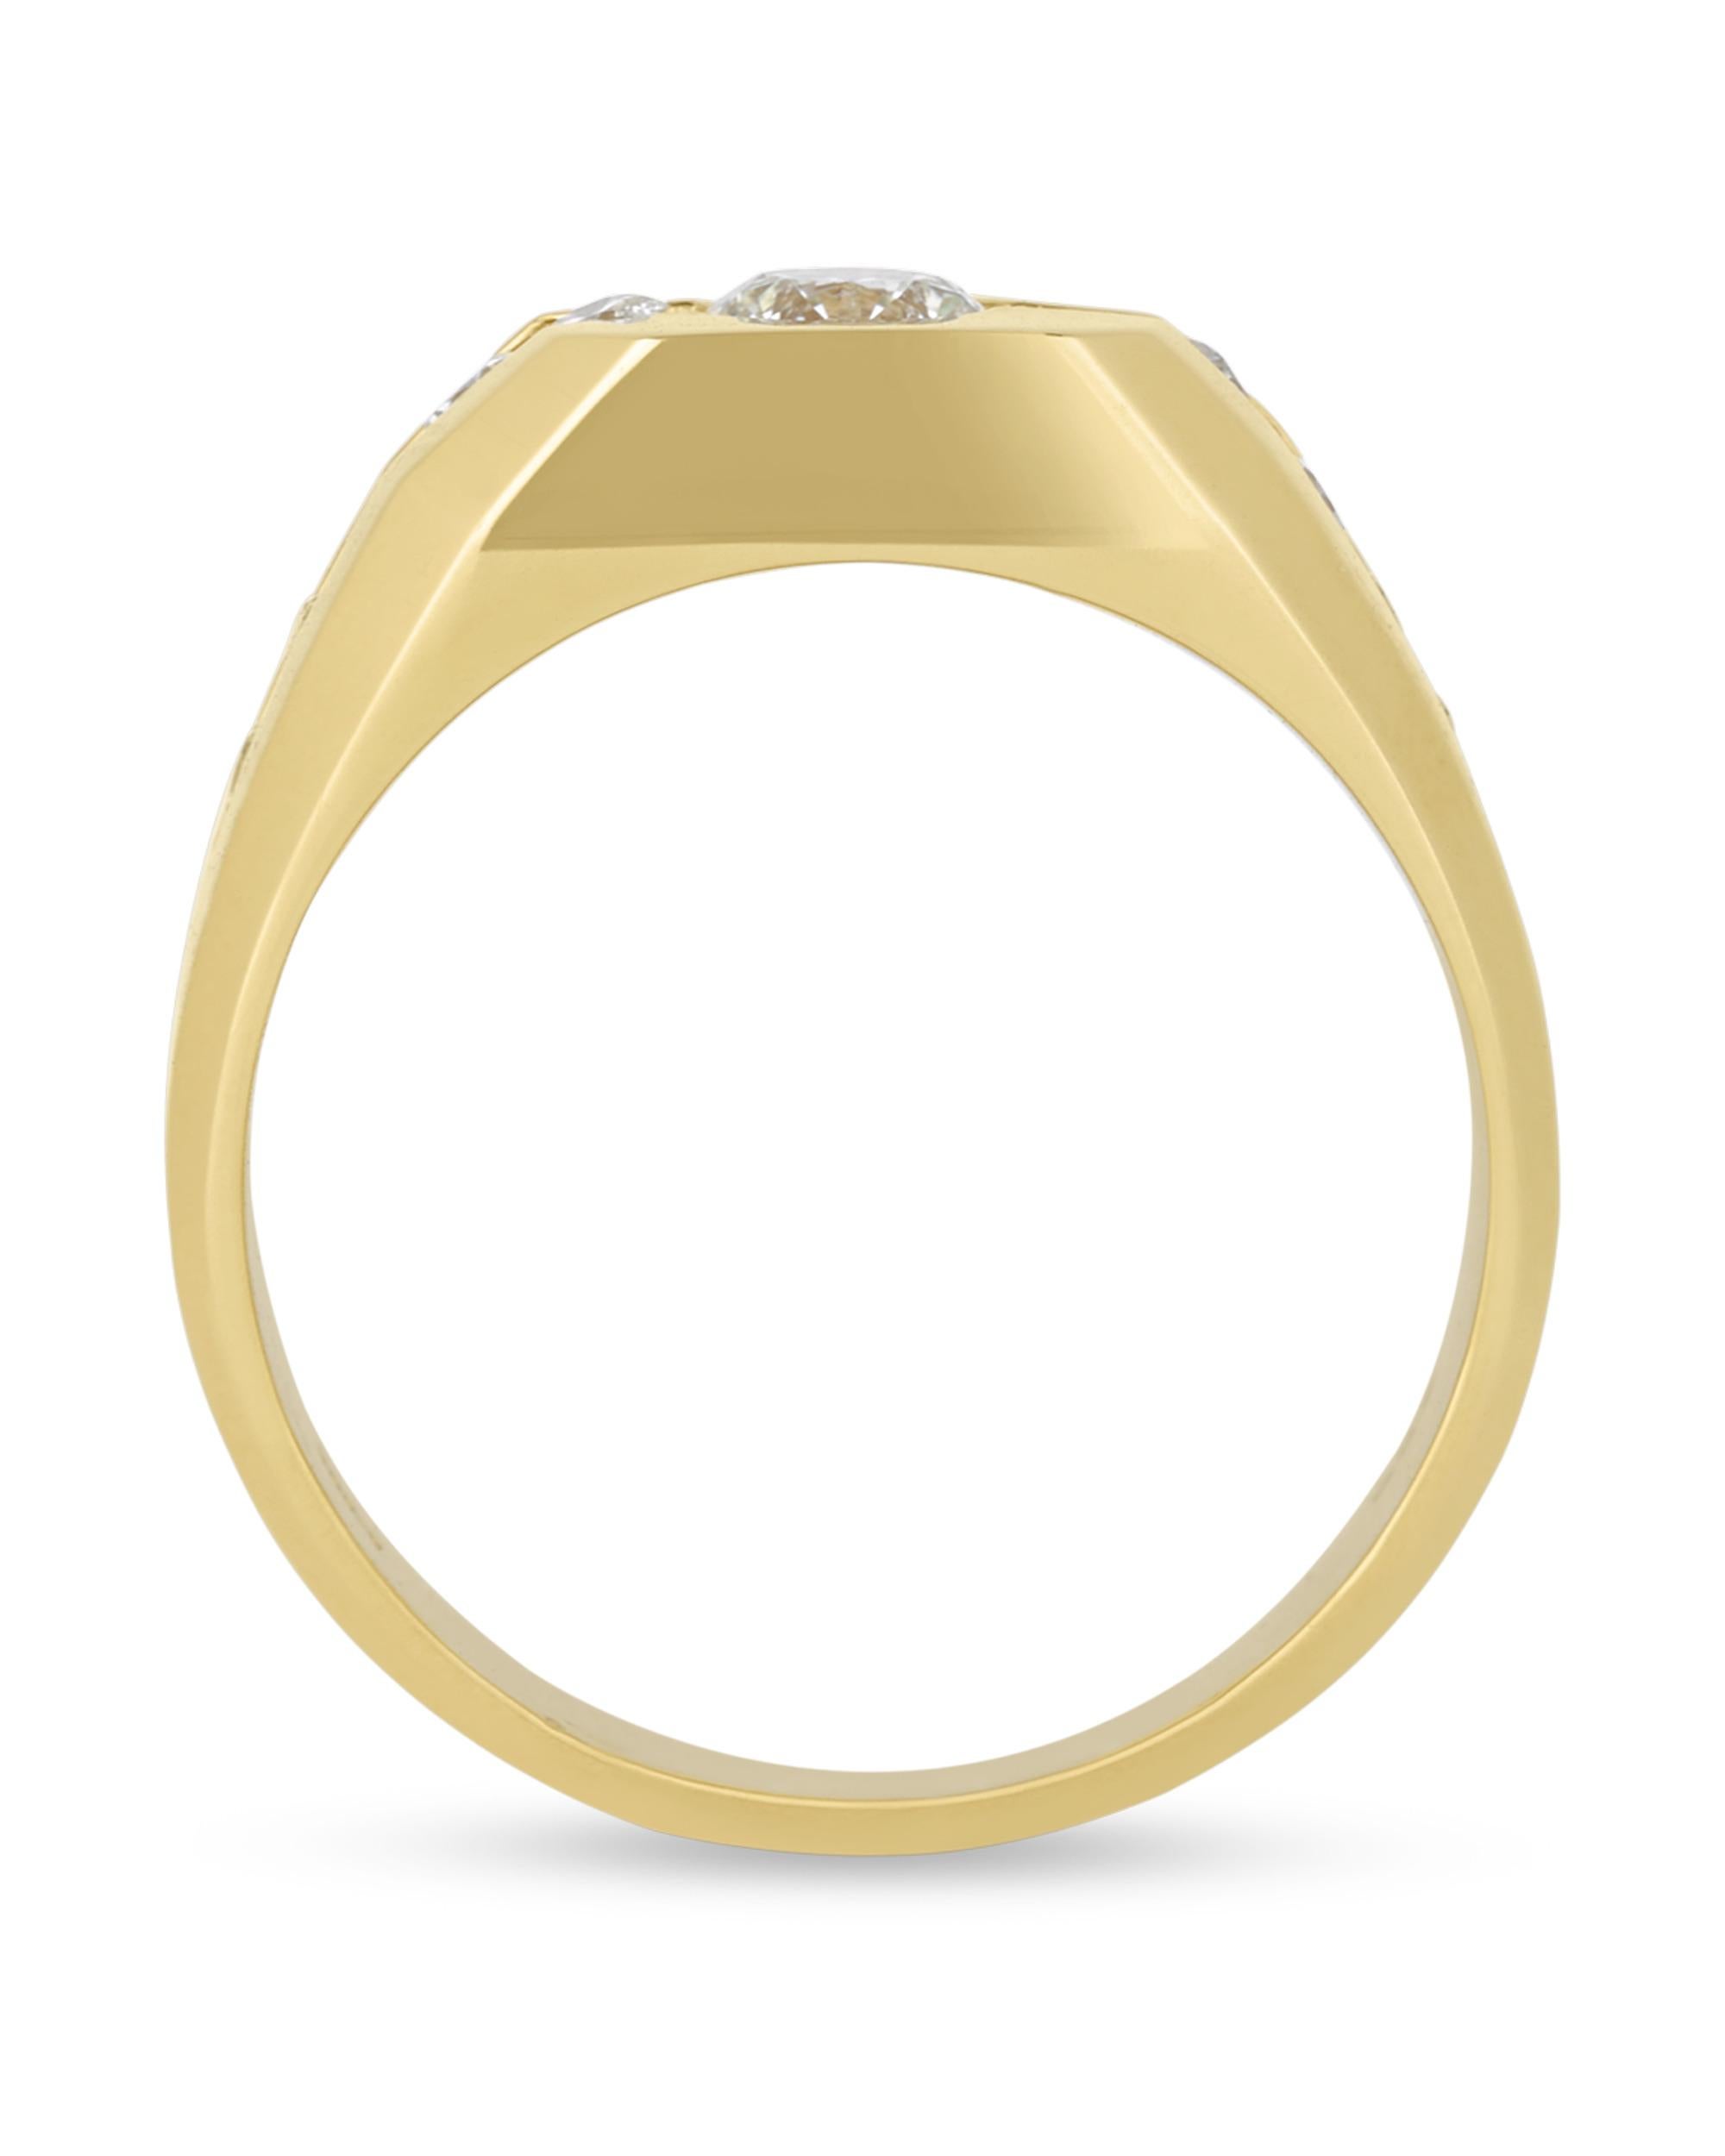 White diamonds totaling 1.35 carats radiate in this handsome men's ring. The central diamond, weighing 0.70-carat, sits within a stepped design of 14K yellow gold.